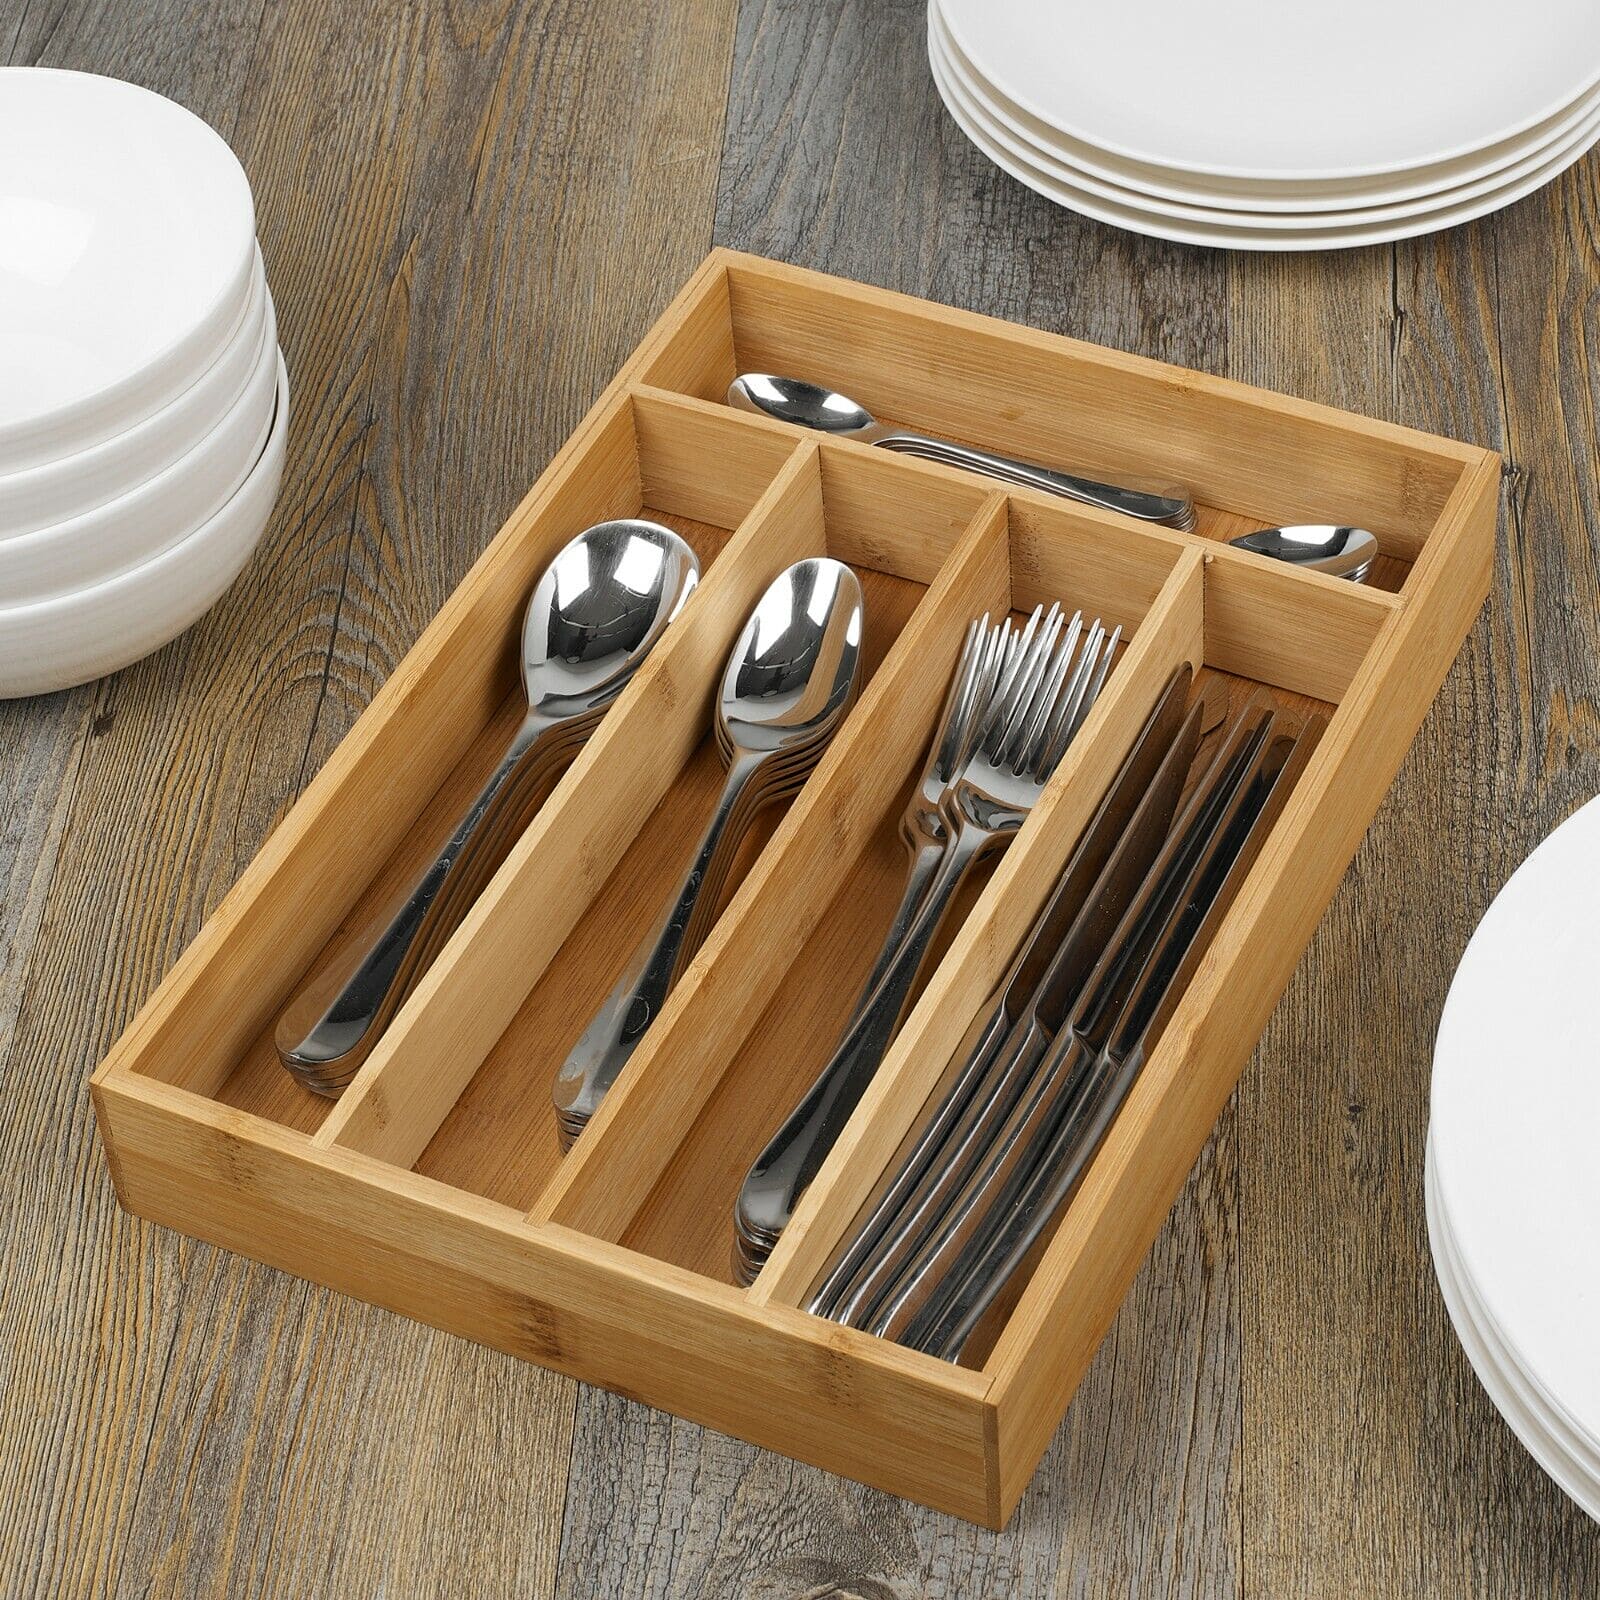 5 Compartment Bamboo Cutlery Tray, Kitchen Drawer Utensils Holder, Wooden Knife Fork Spoon Organizer Case, Bulk Bamboo Cutlery Tray, Drawer Multi Compartment Flatware Tray